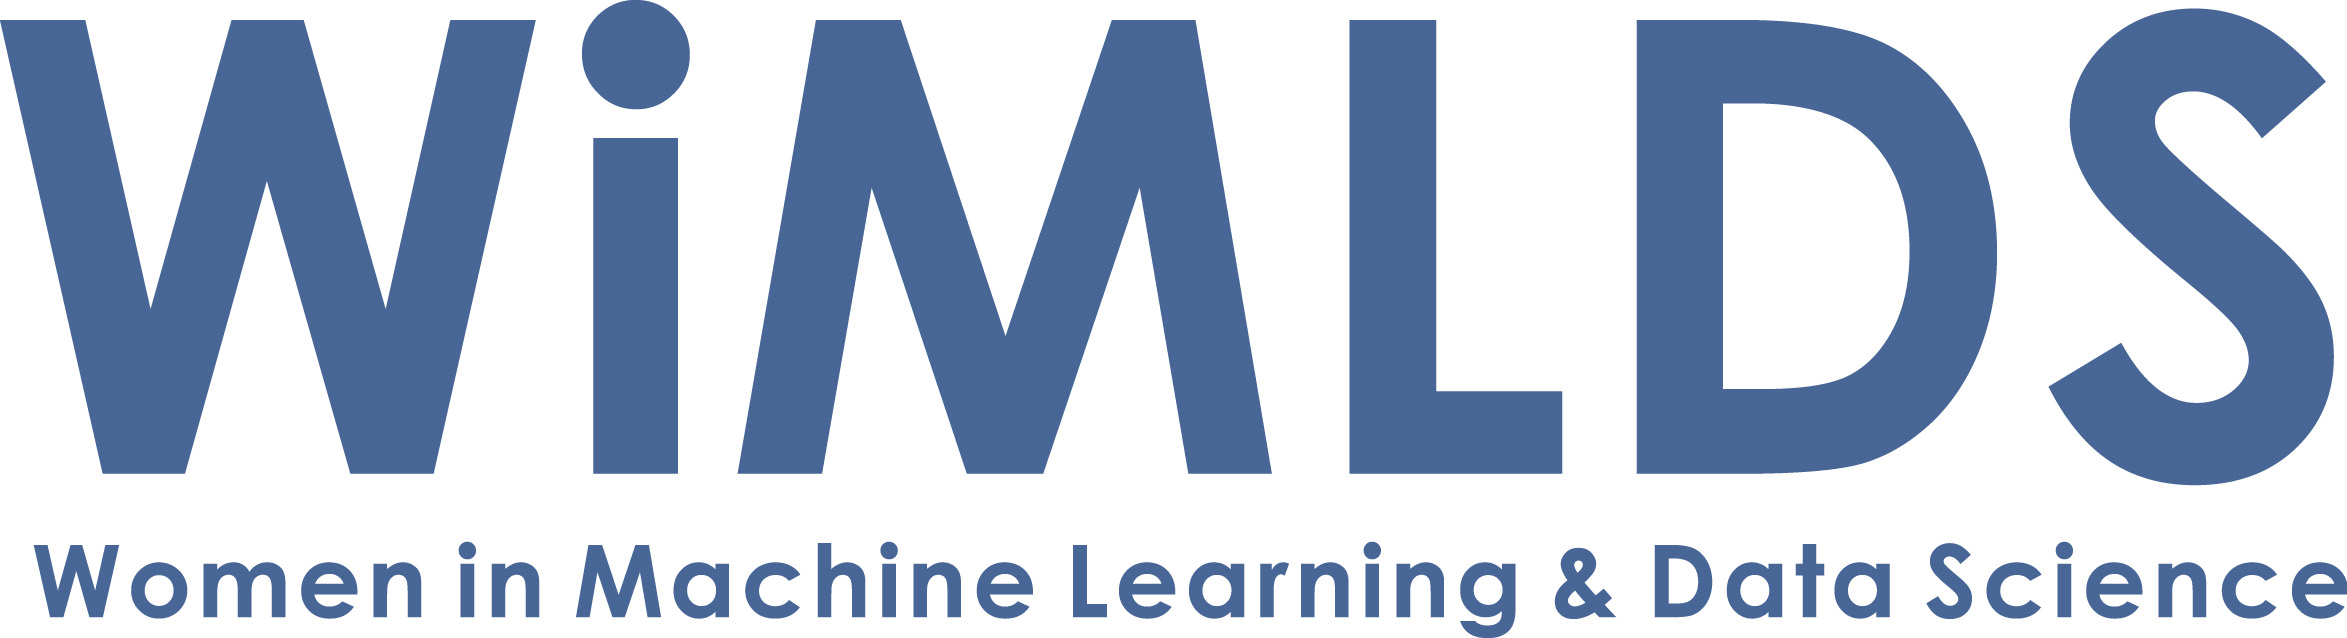 Women in Machine Learning and Data Science | Knowledge 4 All Foundation Ltd.